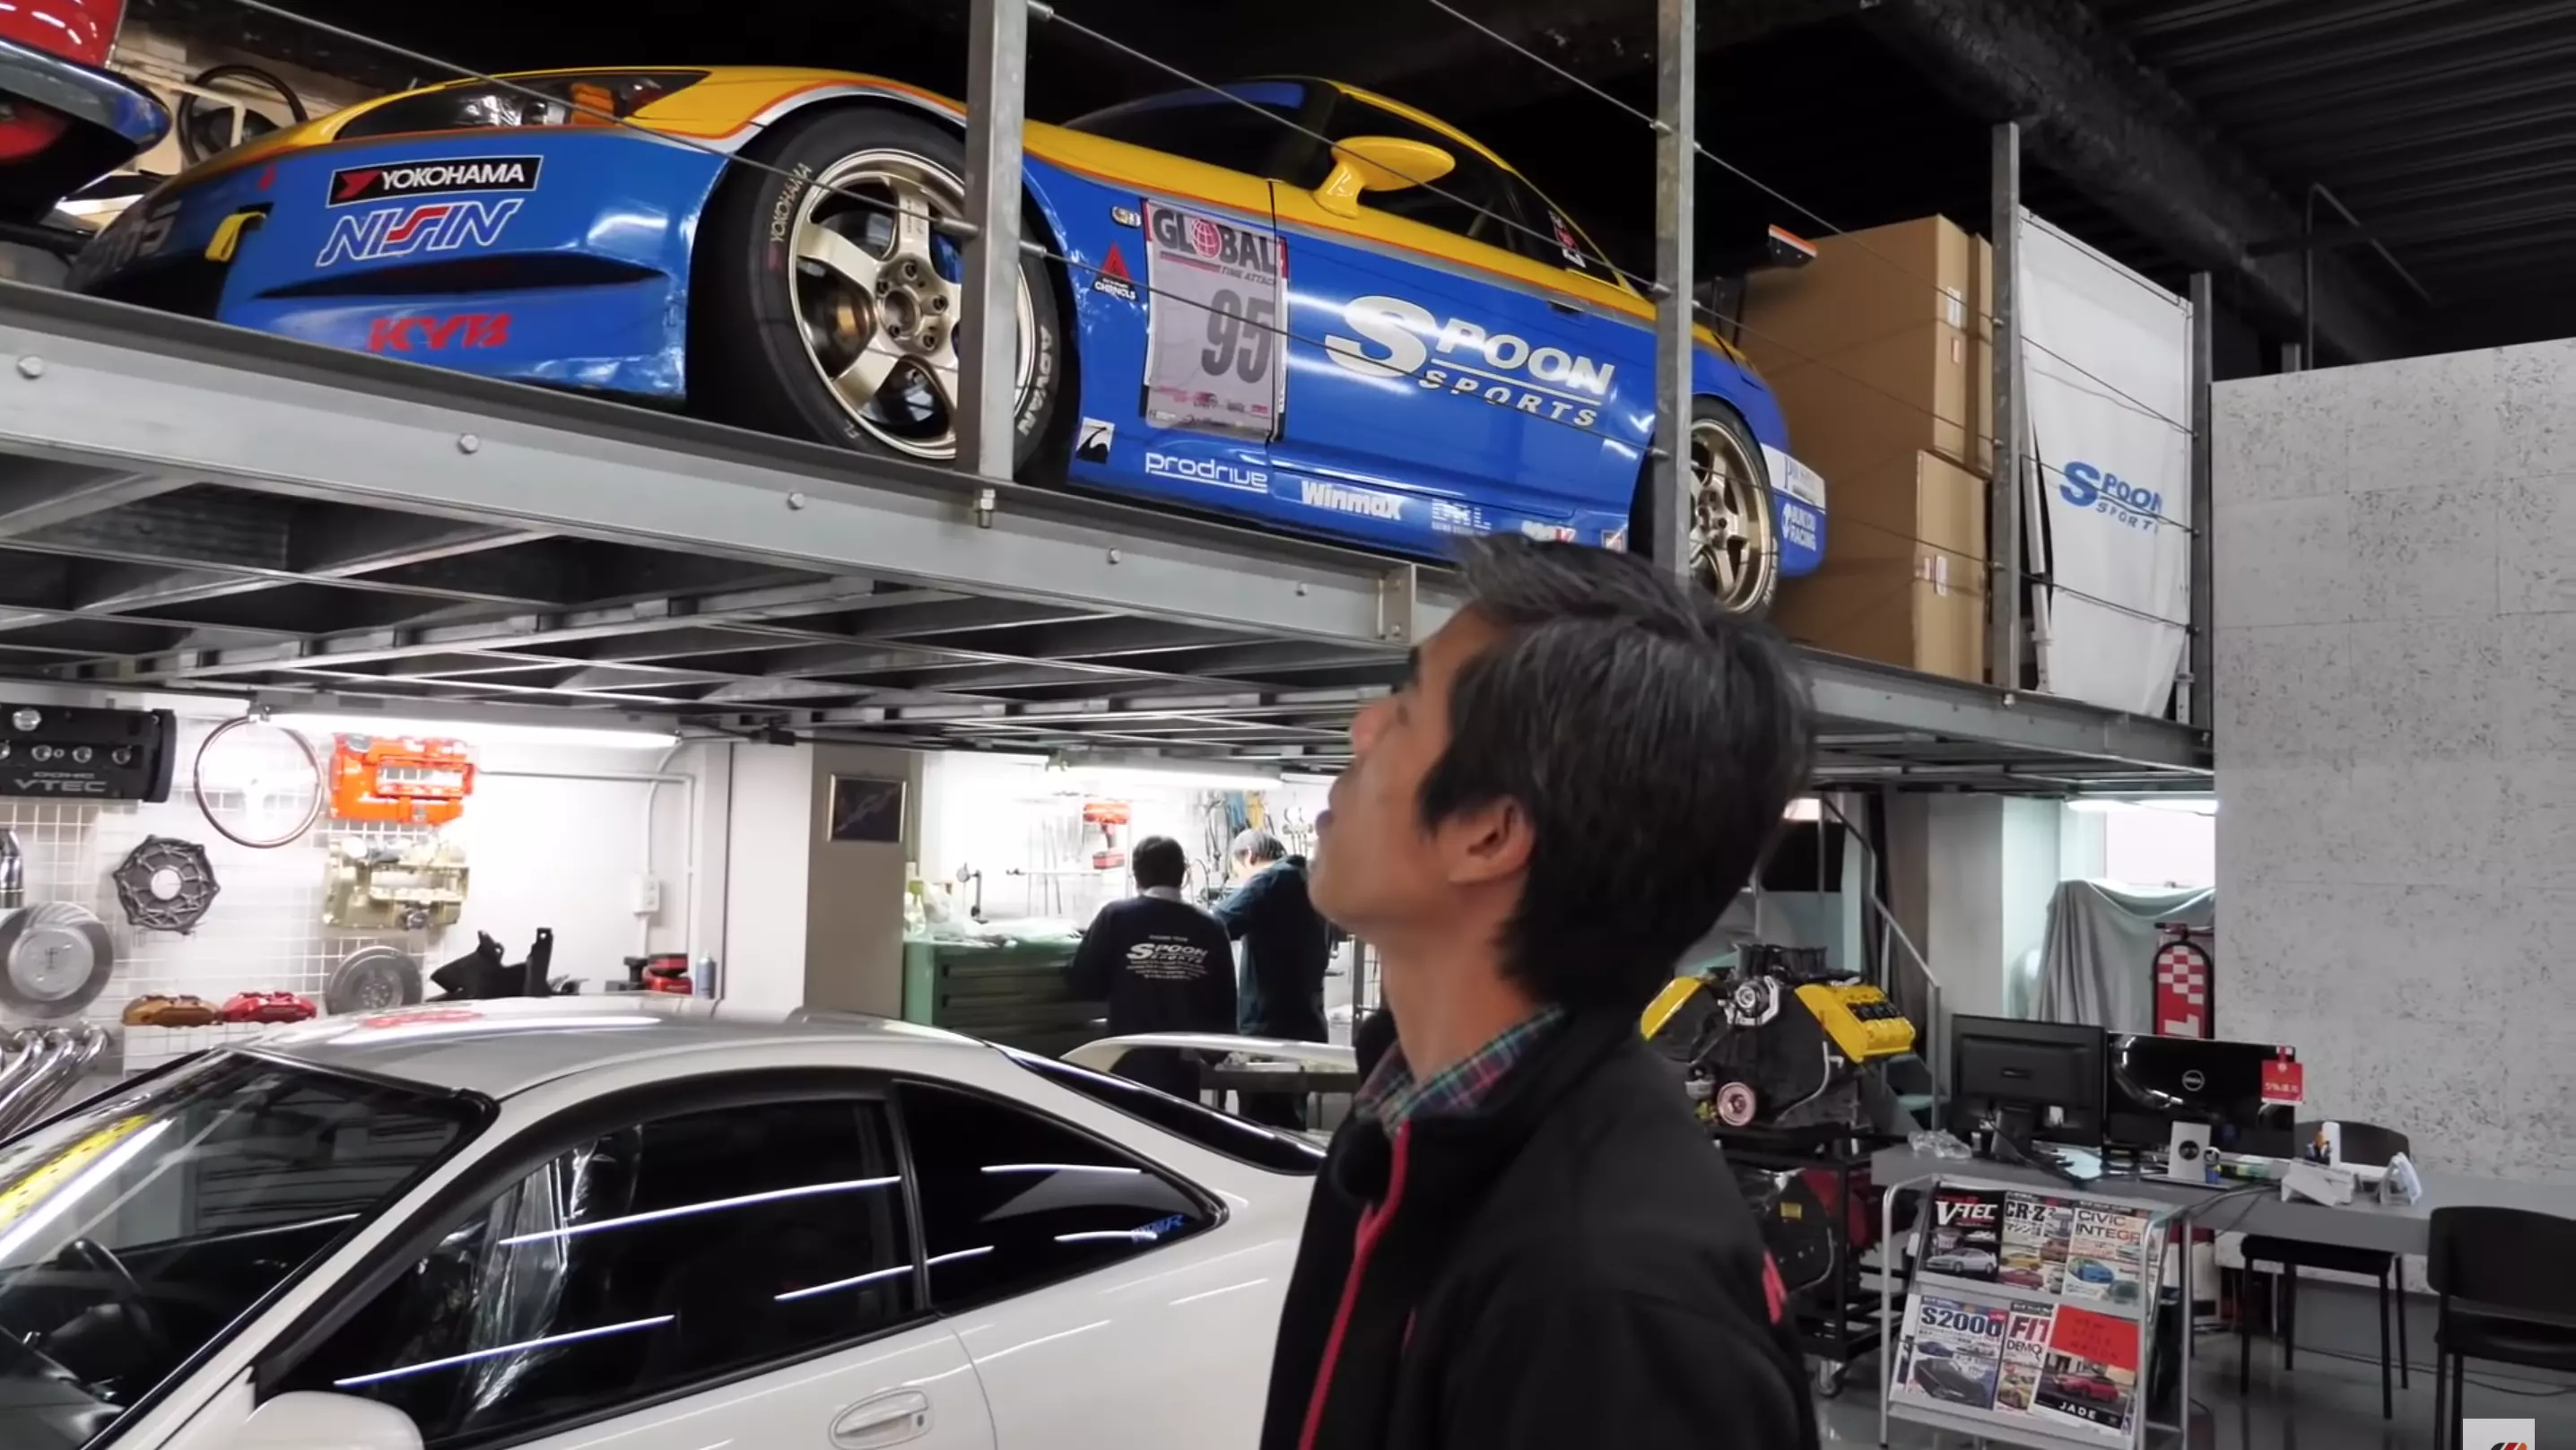 Spoon’s Type One Workshop Is Truly the Promised Land for Honda Fans | Autance